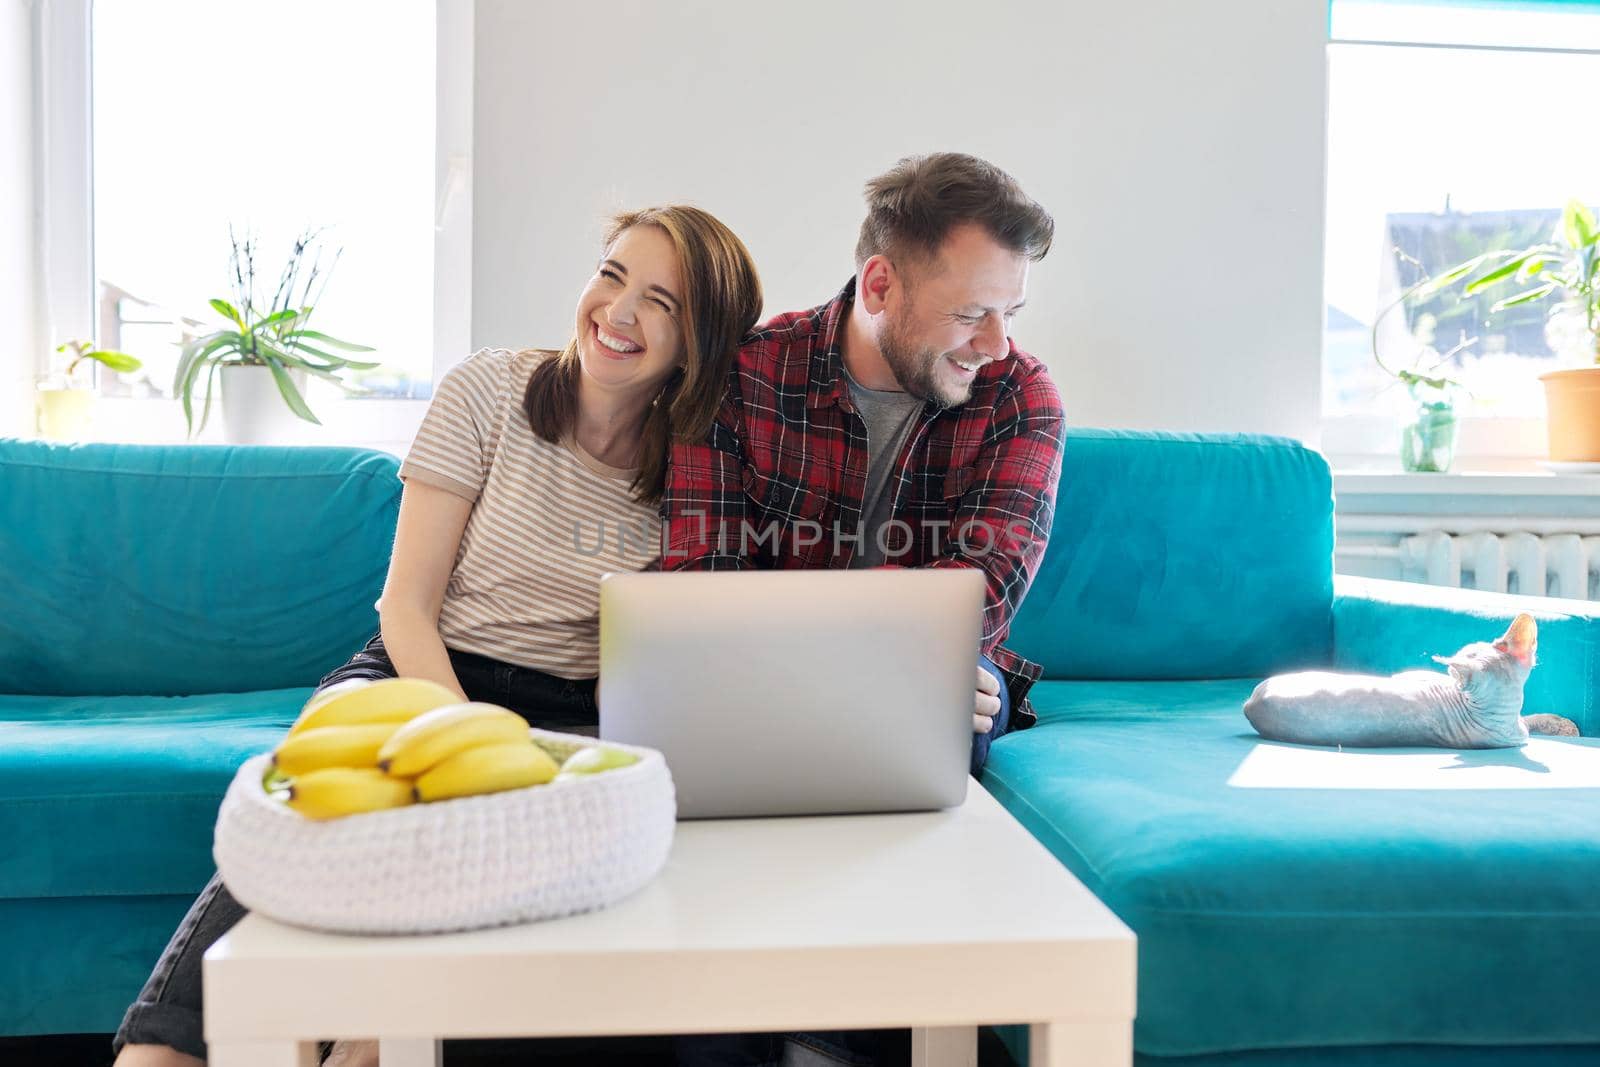 Smiling laughing positive couple 40 years old, husband and wife looking at laptop monitor sitting together at home on sofa in living room, real people life